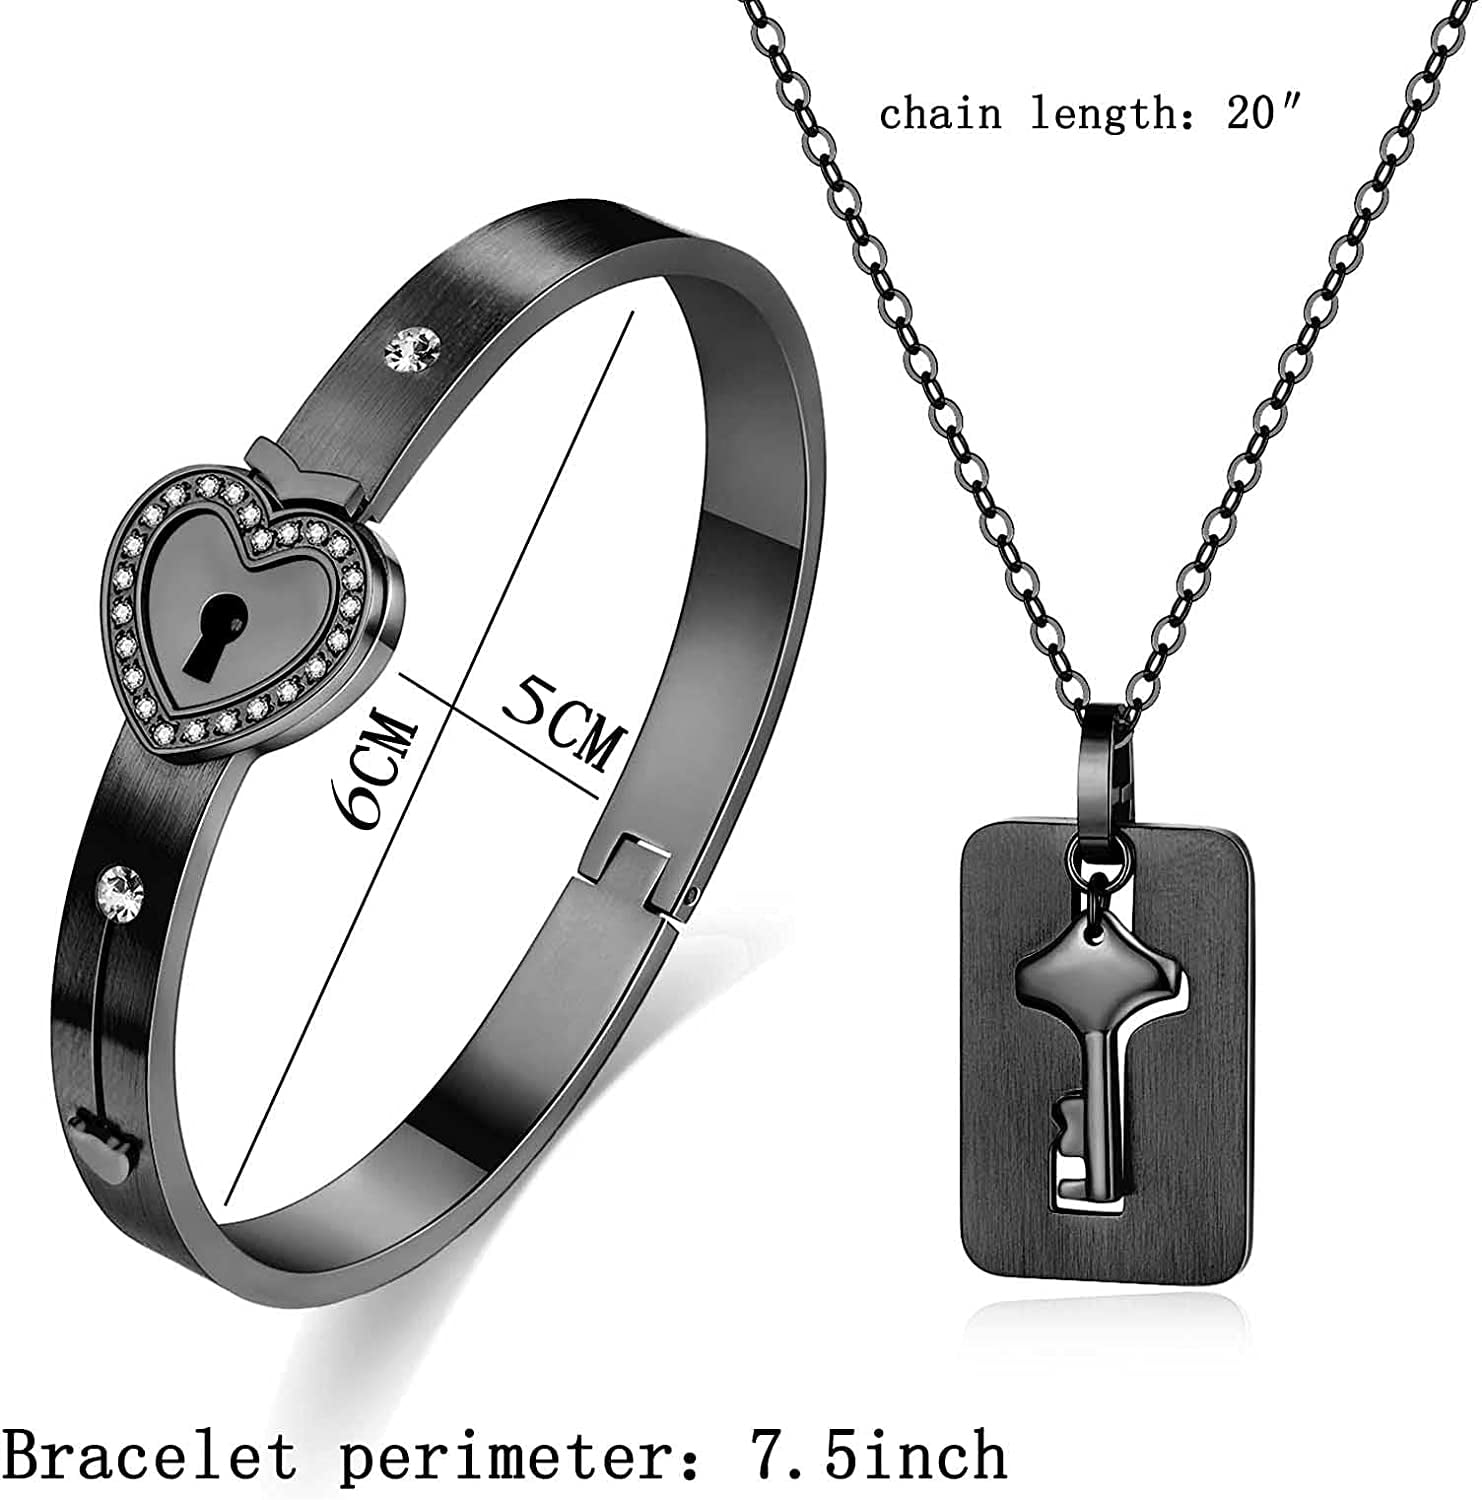 Stainless Steel Love Lock Bracelet Set 2 Silver Tone Beads With Key Bangles  Perfect Couple Mens Jewelry Gift From Qytyo, $26.15 | DHgate.Com